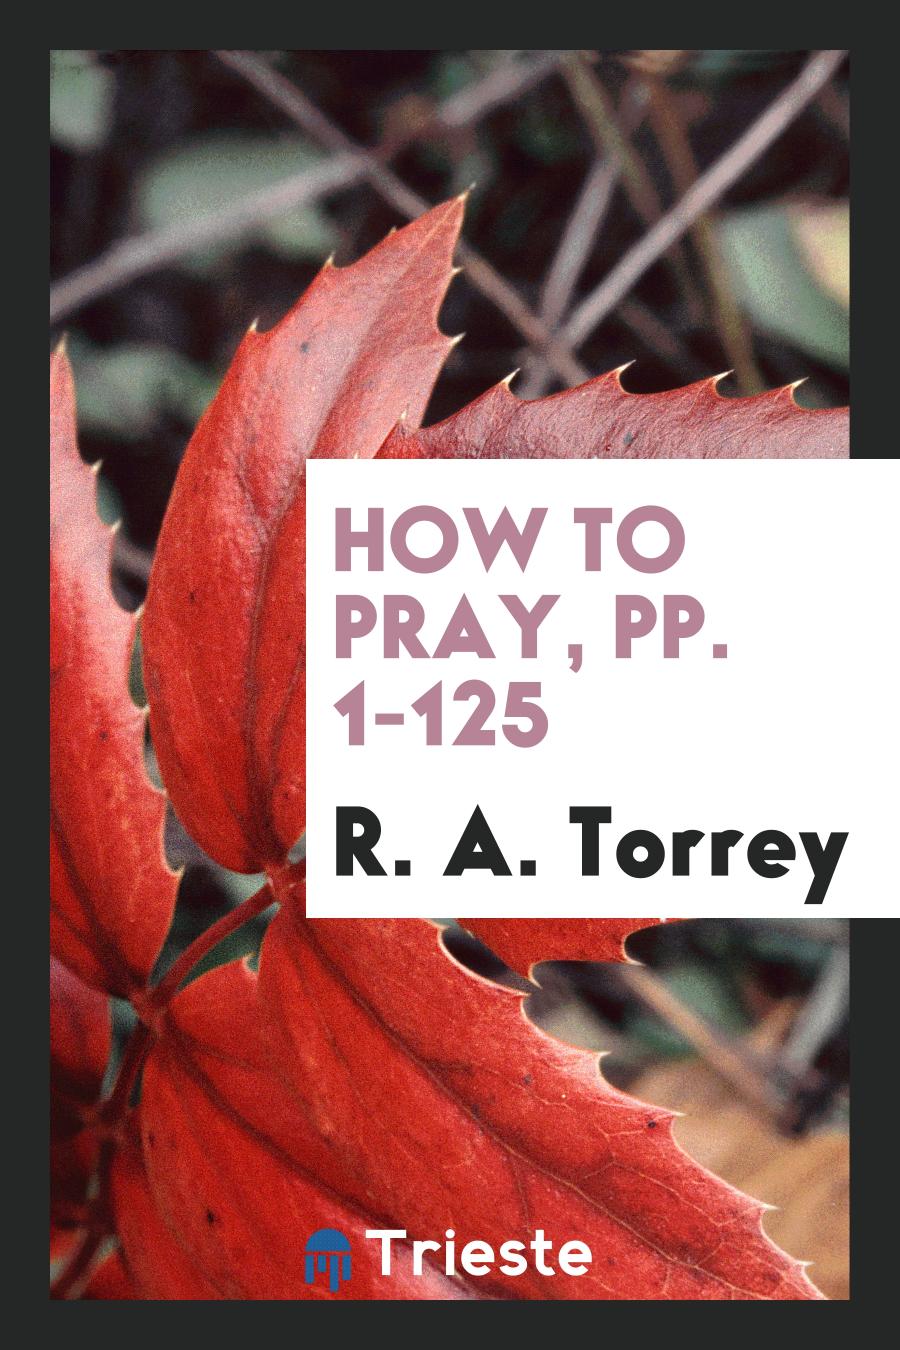 How to Pray, pp. 1-125